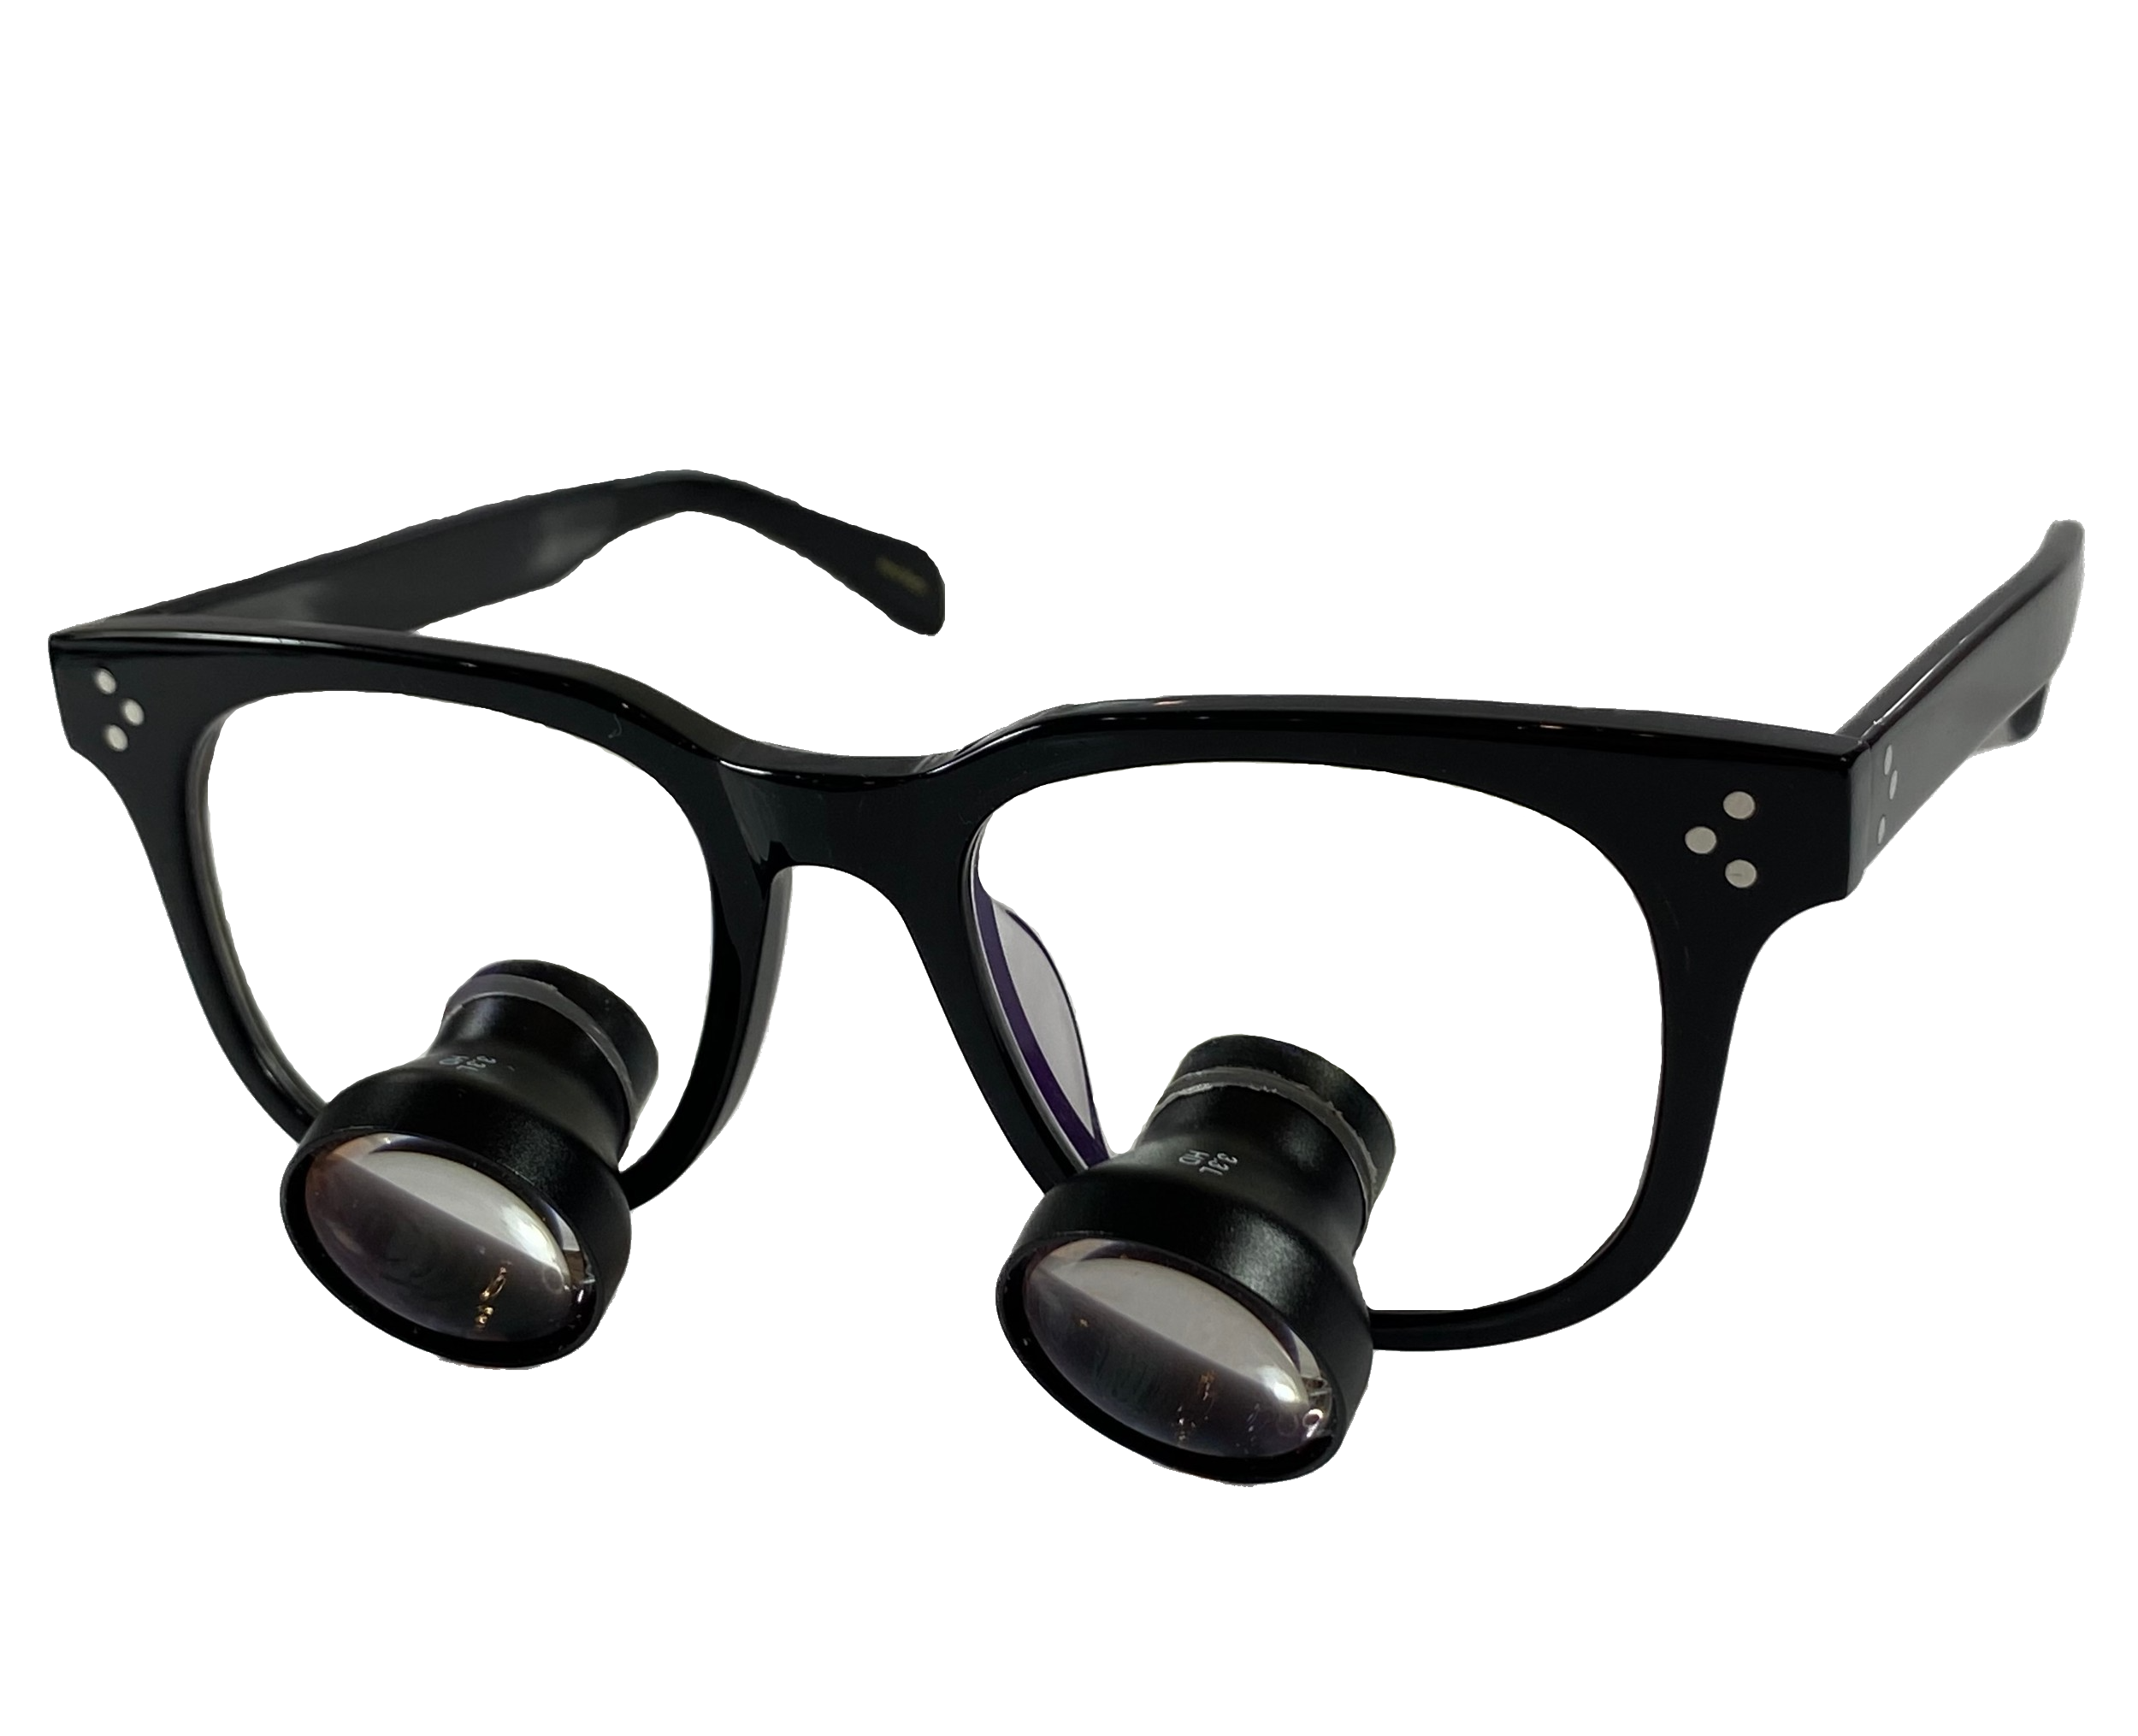 Our ready-made side shield ttl loupe frames are great for splash protection, every dentists favorite. These frames offer side protection and are light weight.